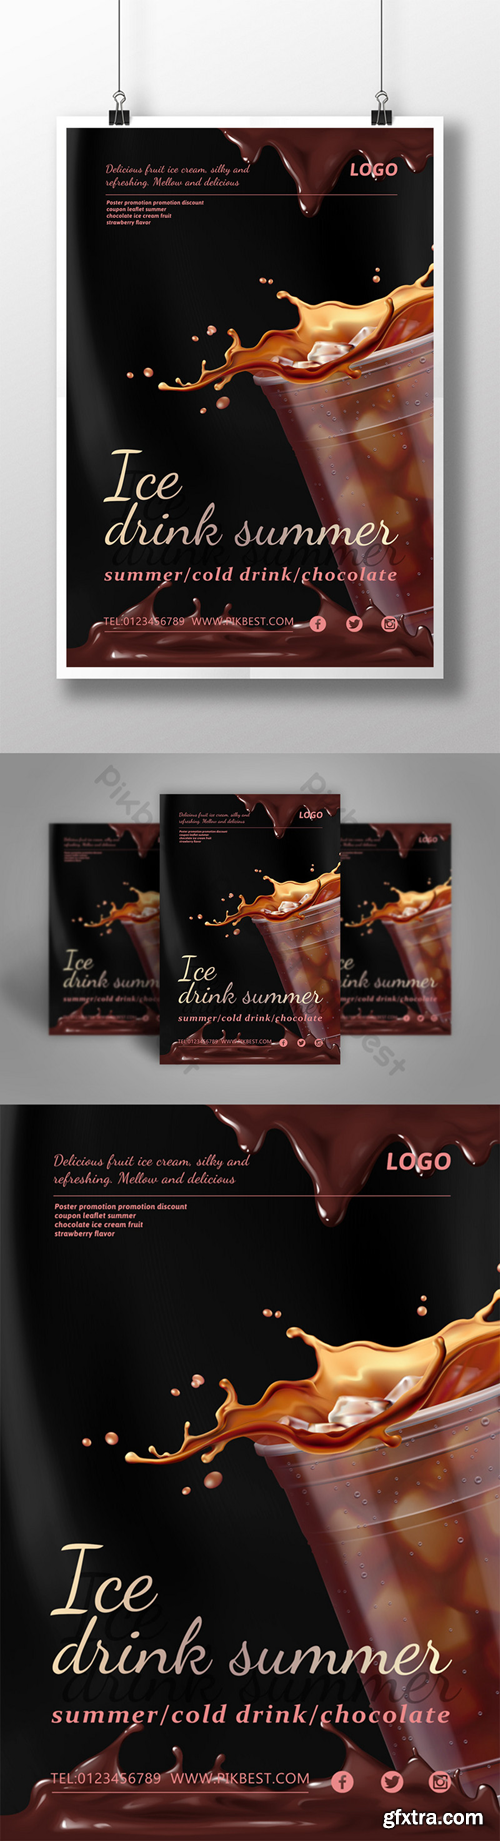 Summer cold drink coffee ice cubes glass chocolate fluid liquid merchandise promotion post Template PSD